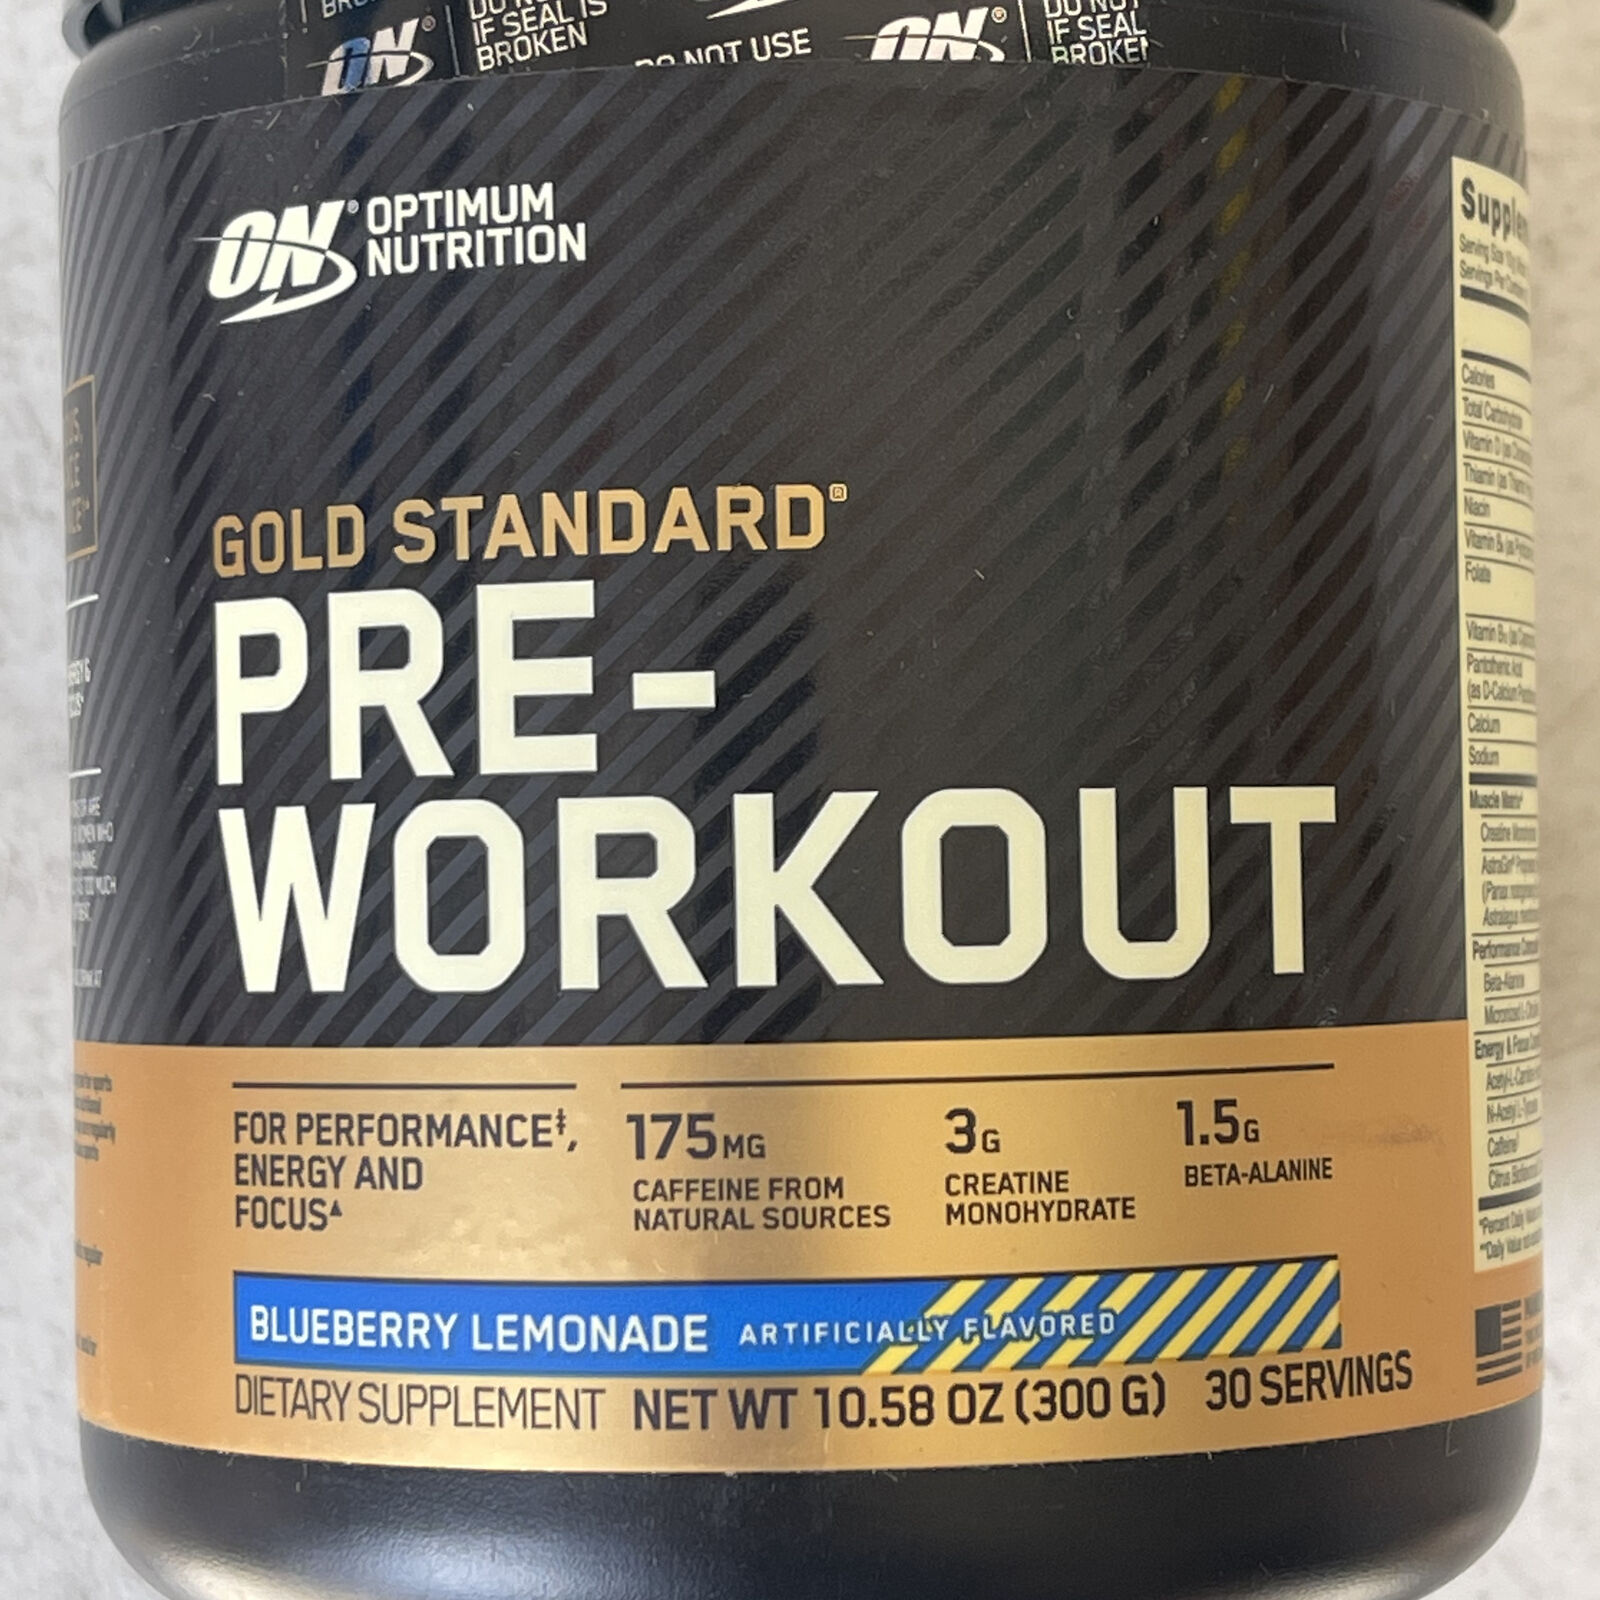 Optimum Nutrition Gold Standard Pre Workout For Performance Energy and Focus